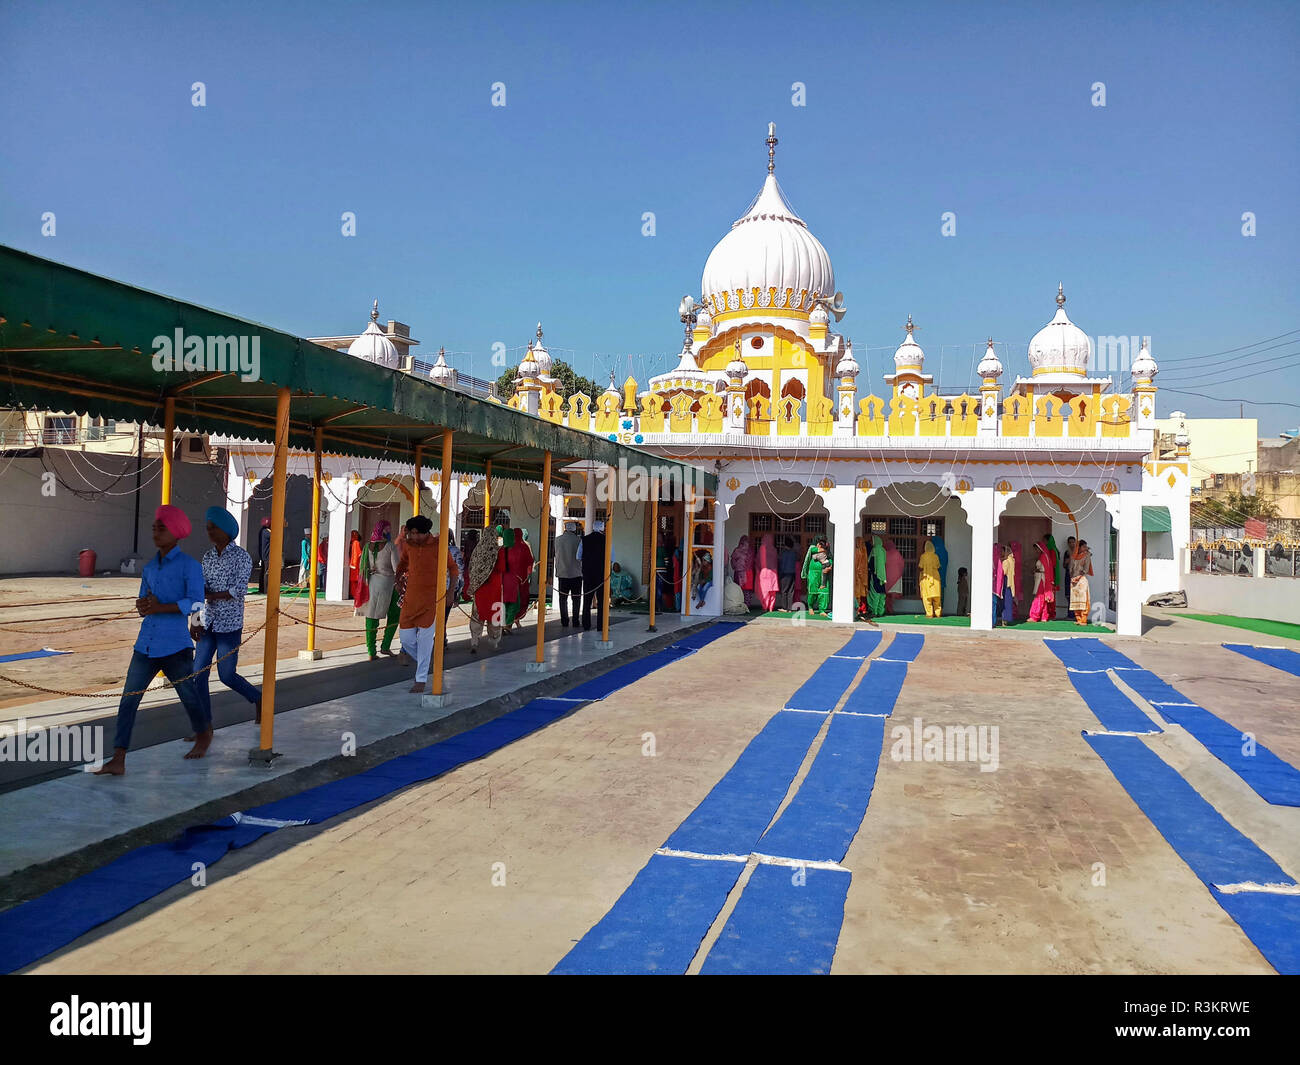 Mohali, Punjab, India. 23rd Nov, 2018. Devotees are seen paying obeisance at the Khanpur Gurduwara during the occasion of the 550th birth anniversary of Guru Nanak Dev in Mohali.Sikhism was founded in the 15th century by Guru Nanak, who broke away from Hinduism, India's dominant religion, He preached the equality of races and genders and the rejection of image-worship and the caste system. Credit: Saqib Majeed/SOPA Images/ZUMA Wire/Alamy Live News Stock Photo